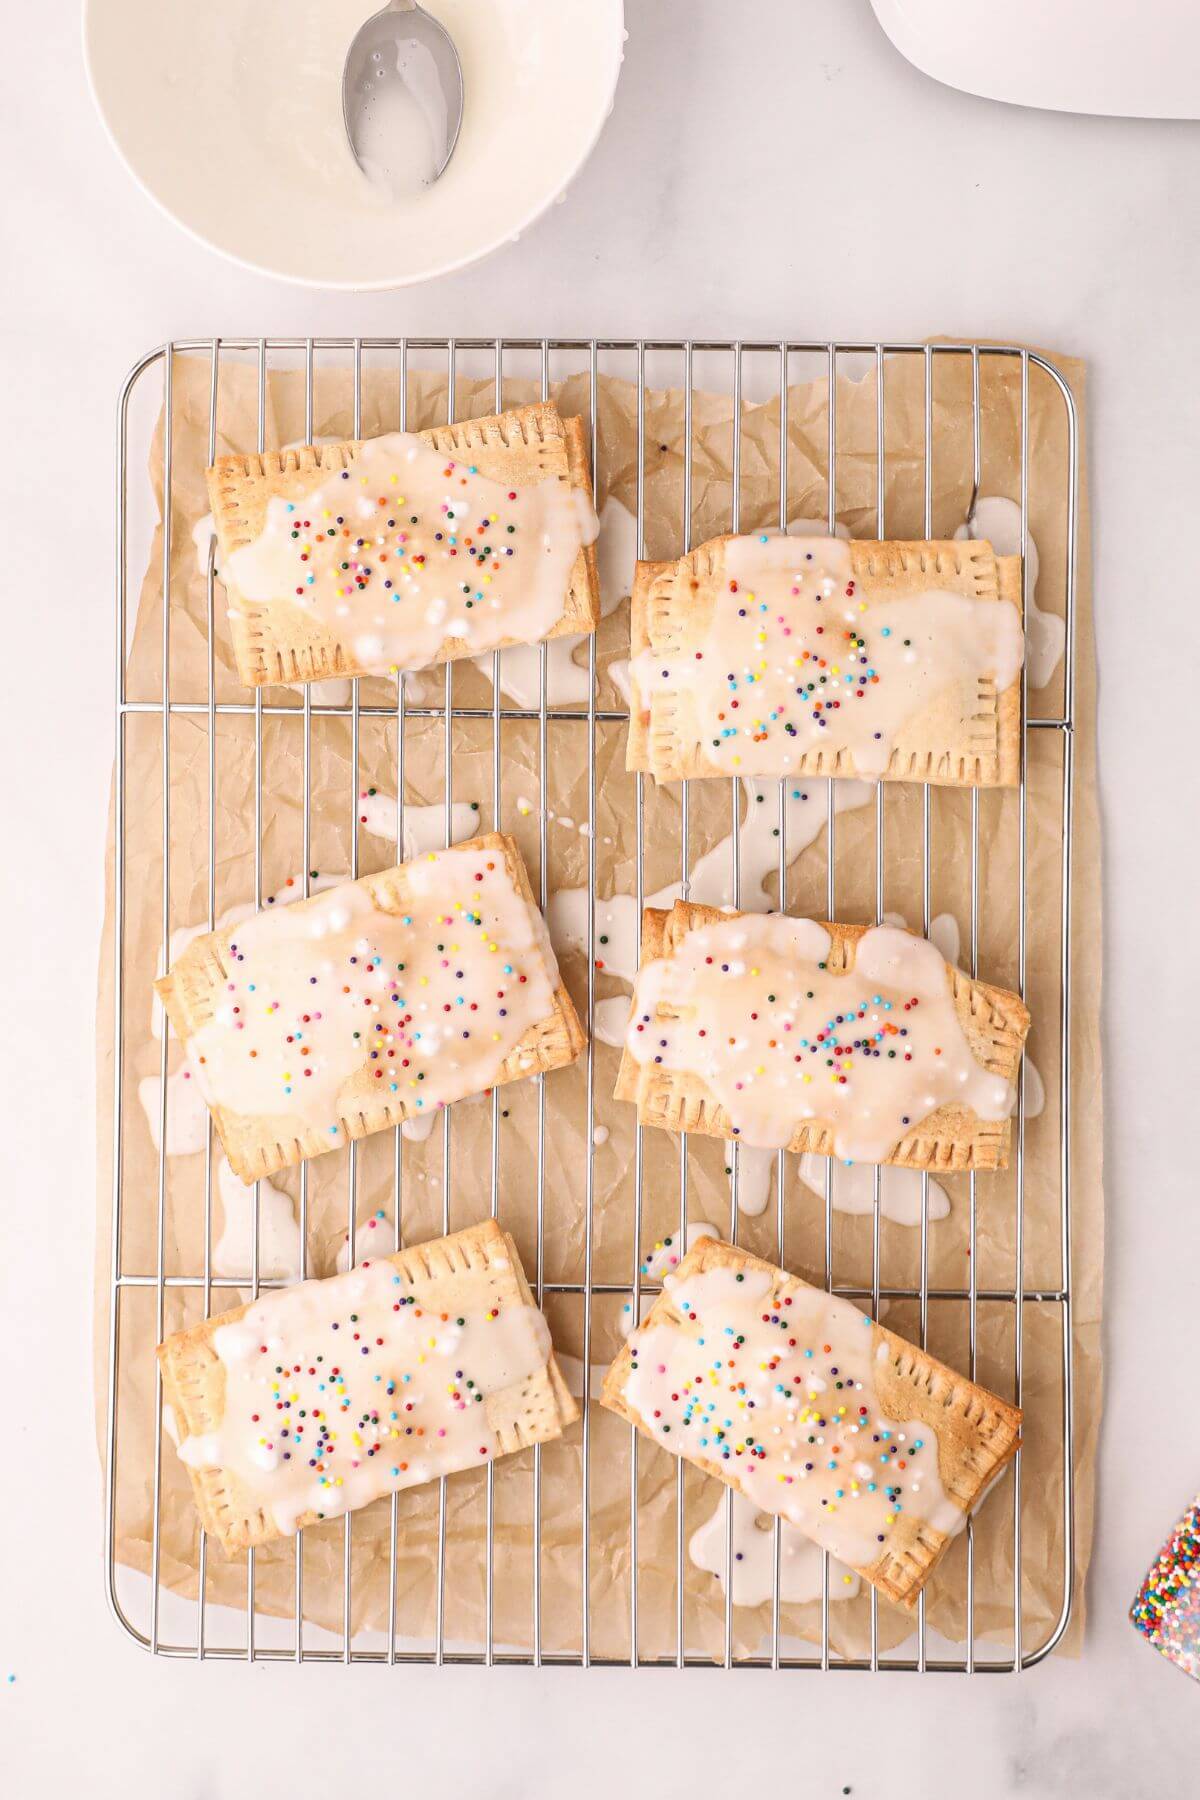 Golden pastries drizzled with white glaze and sprinkles on a cooling rack. 